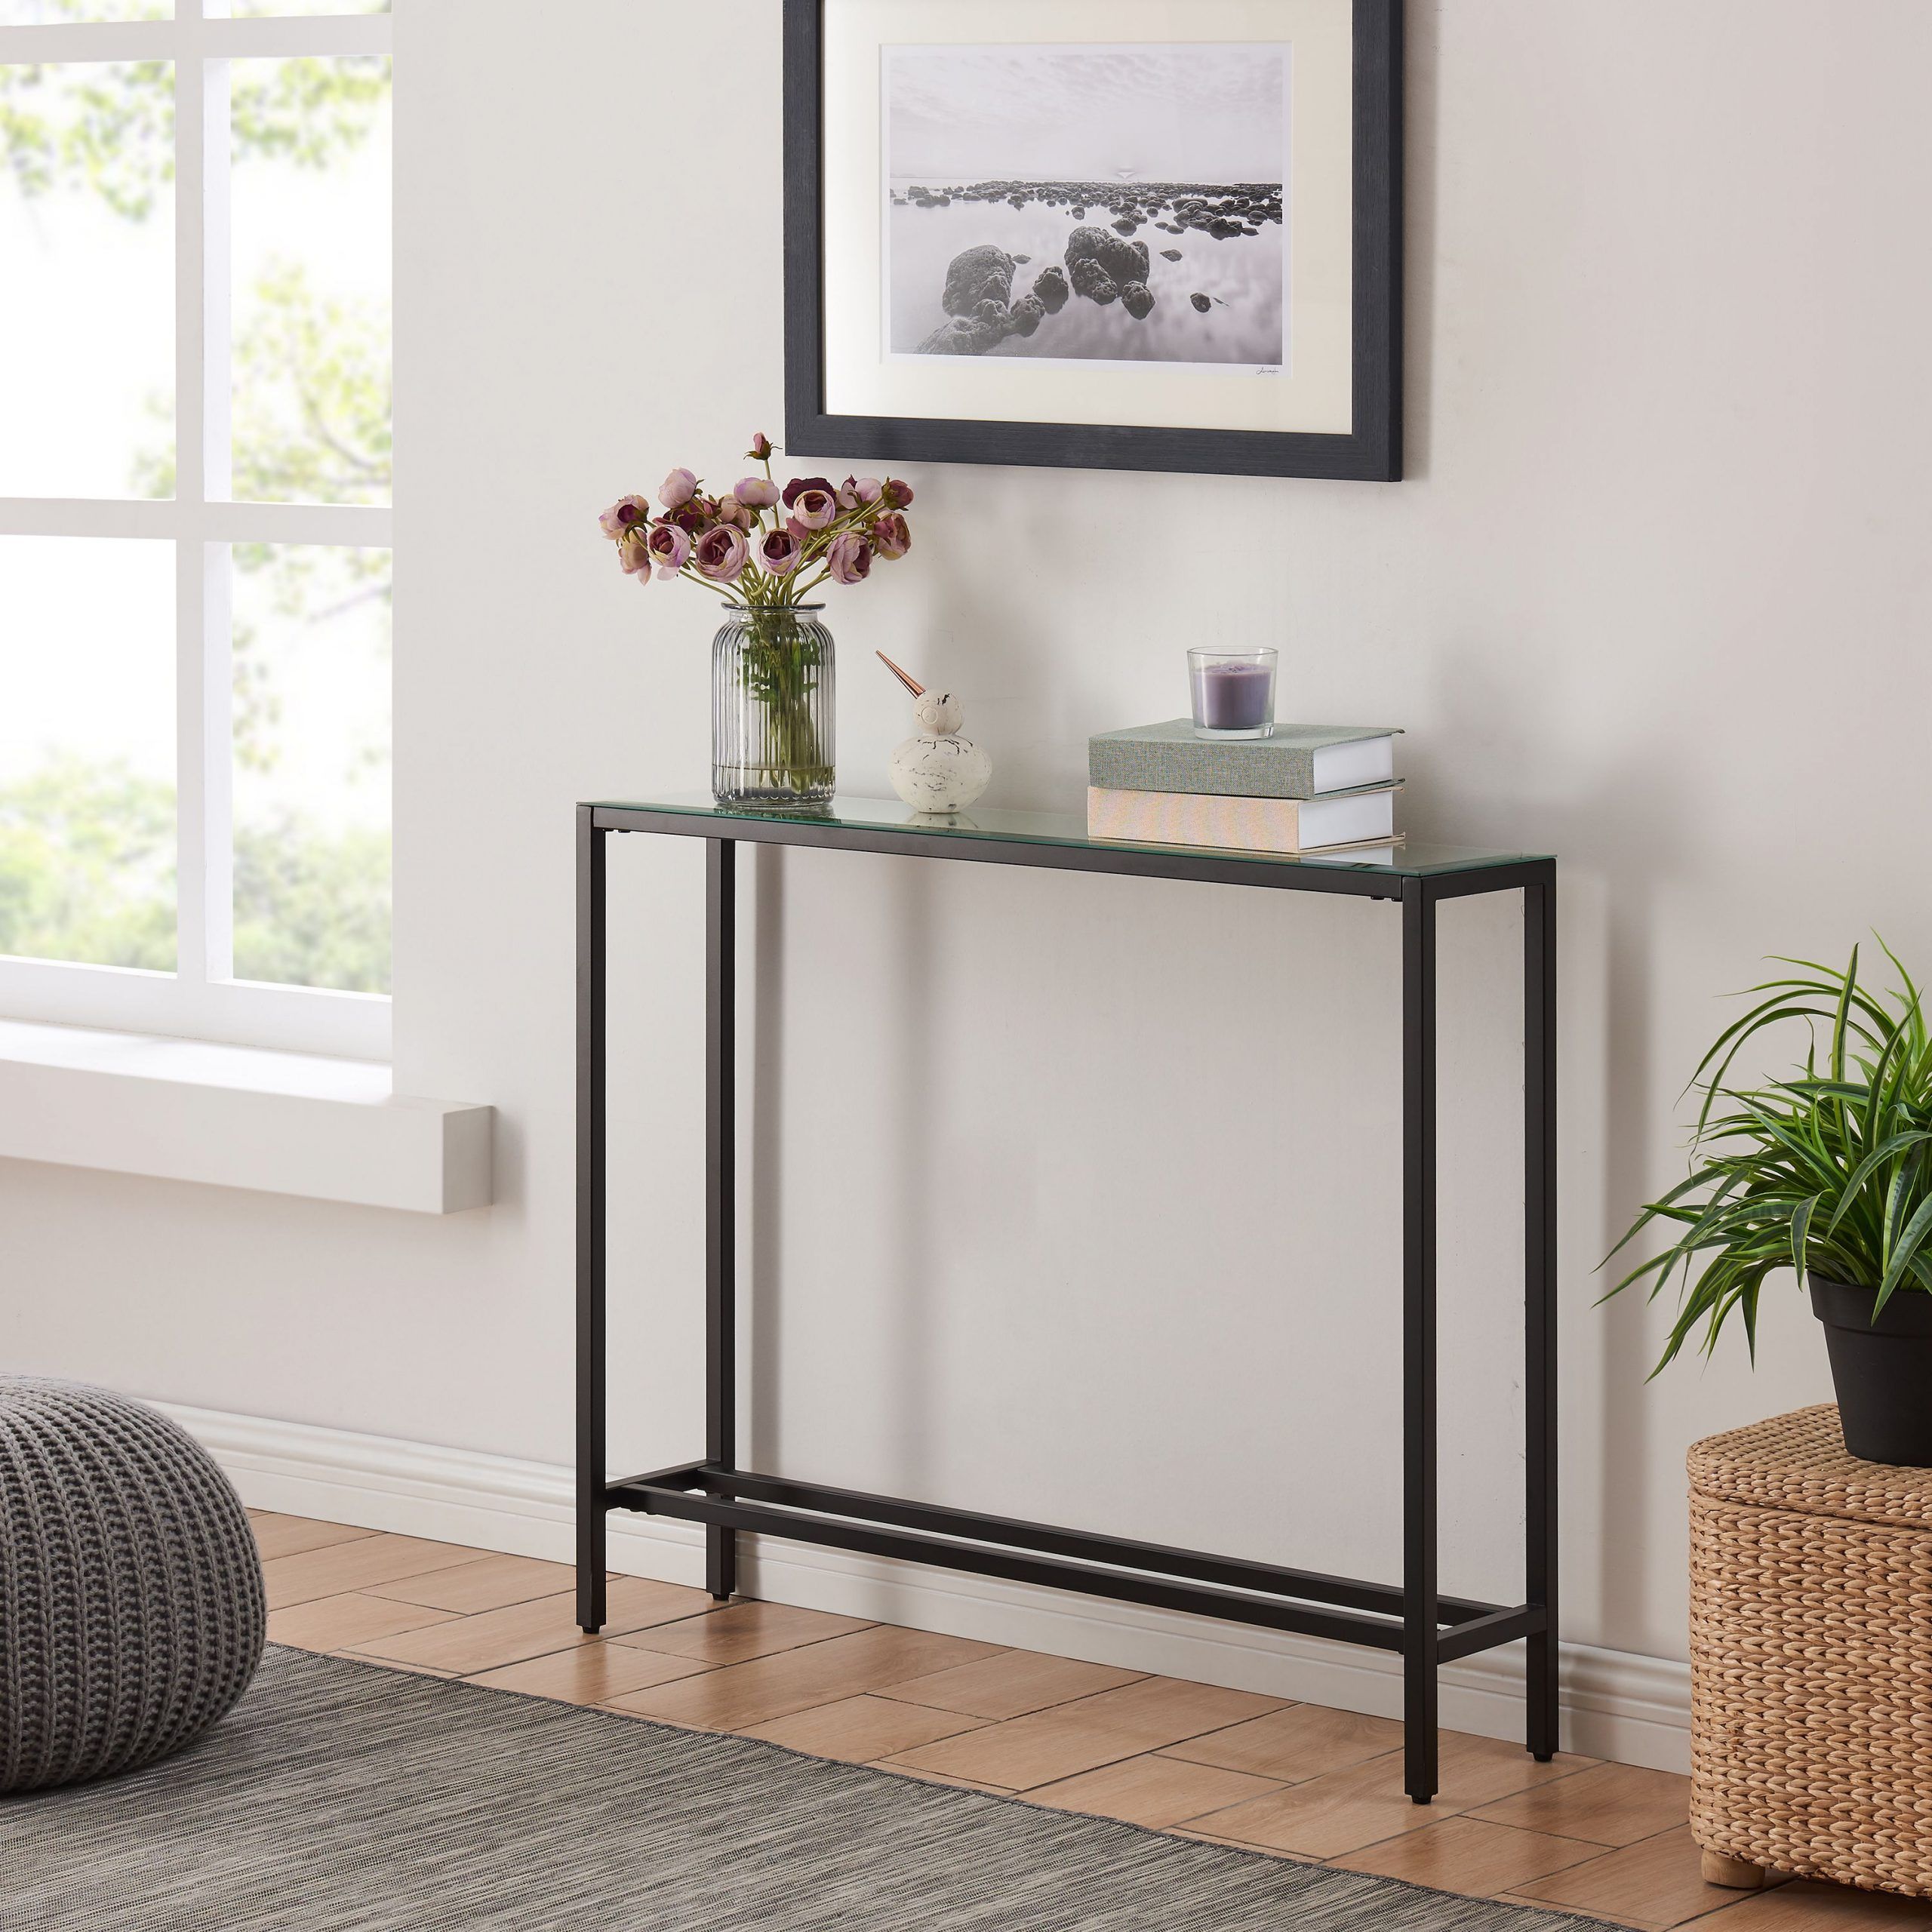 Derkkin Narrow Mini Console Table, Transitional, Black Intended For Antique White Black Console Tables (View 13 of 20)